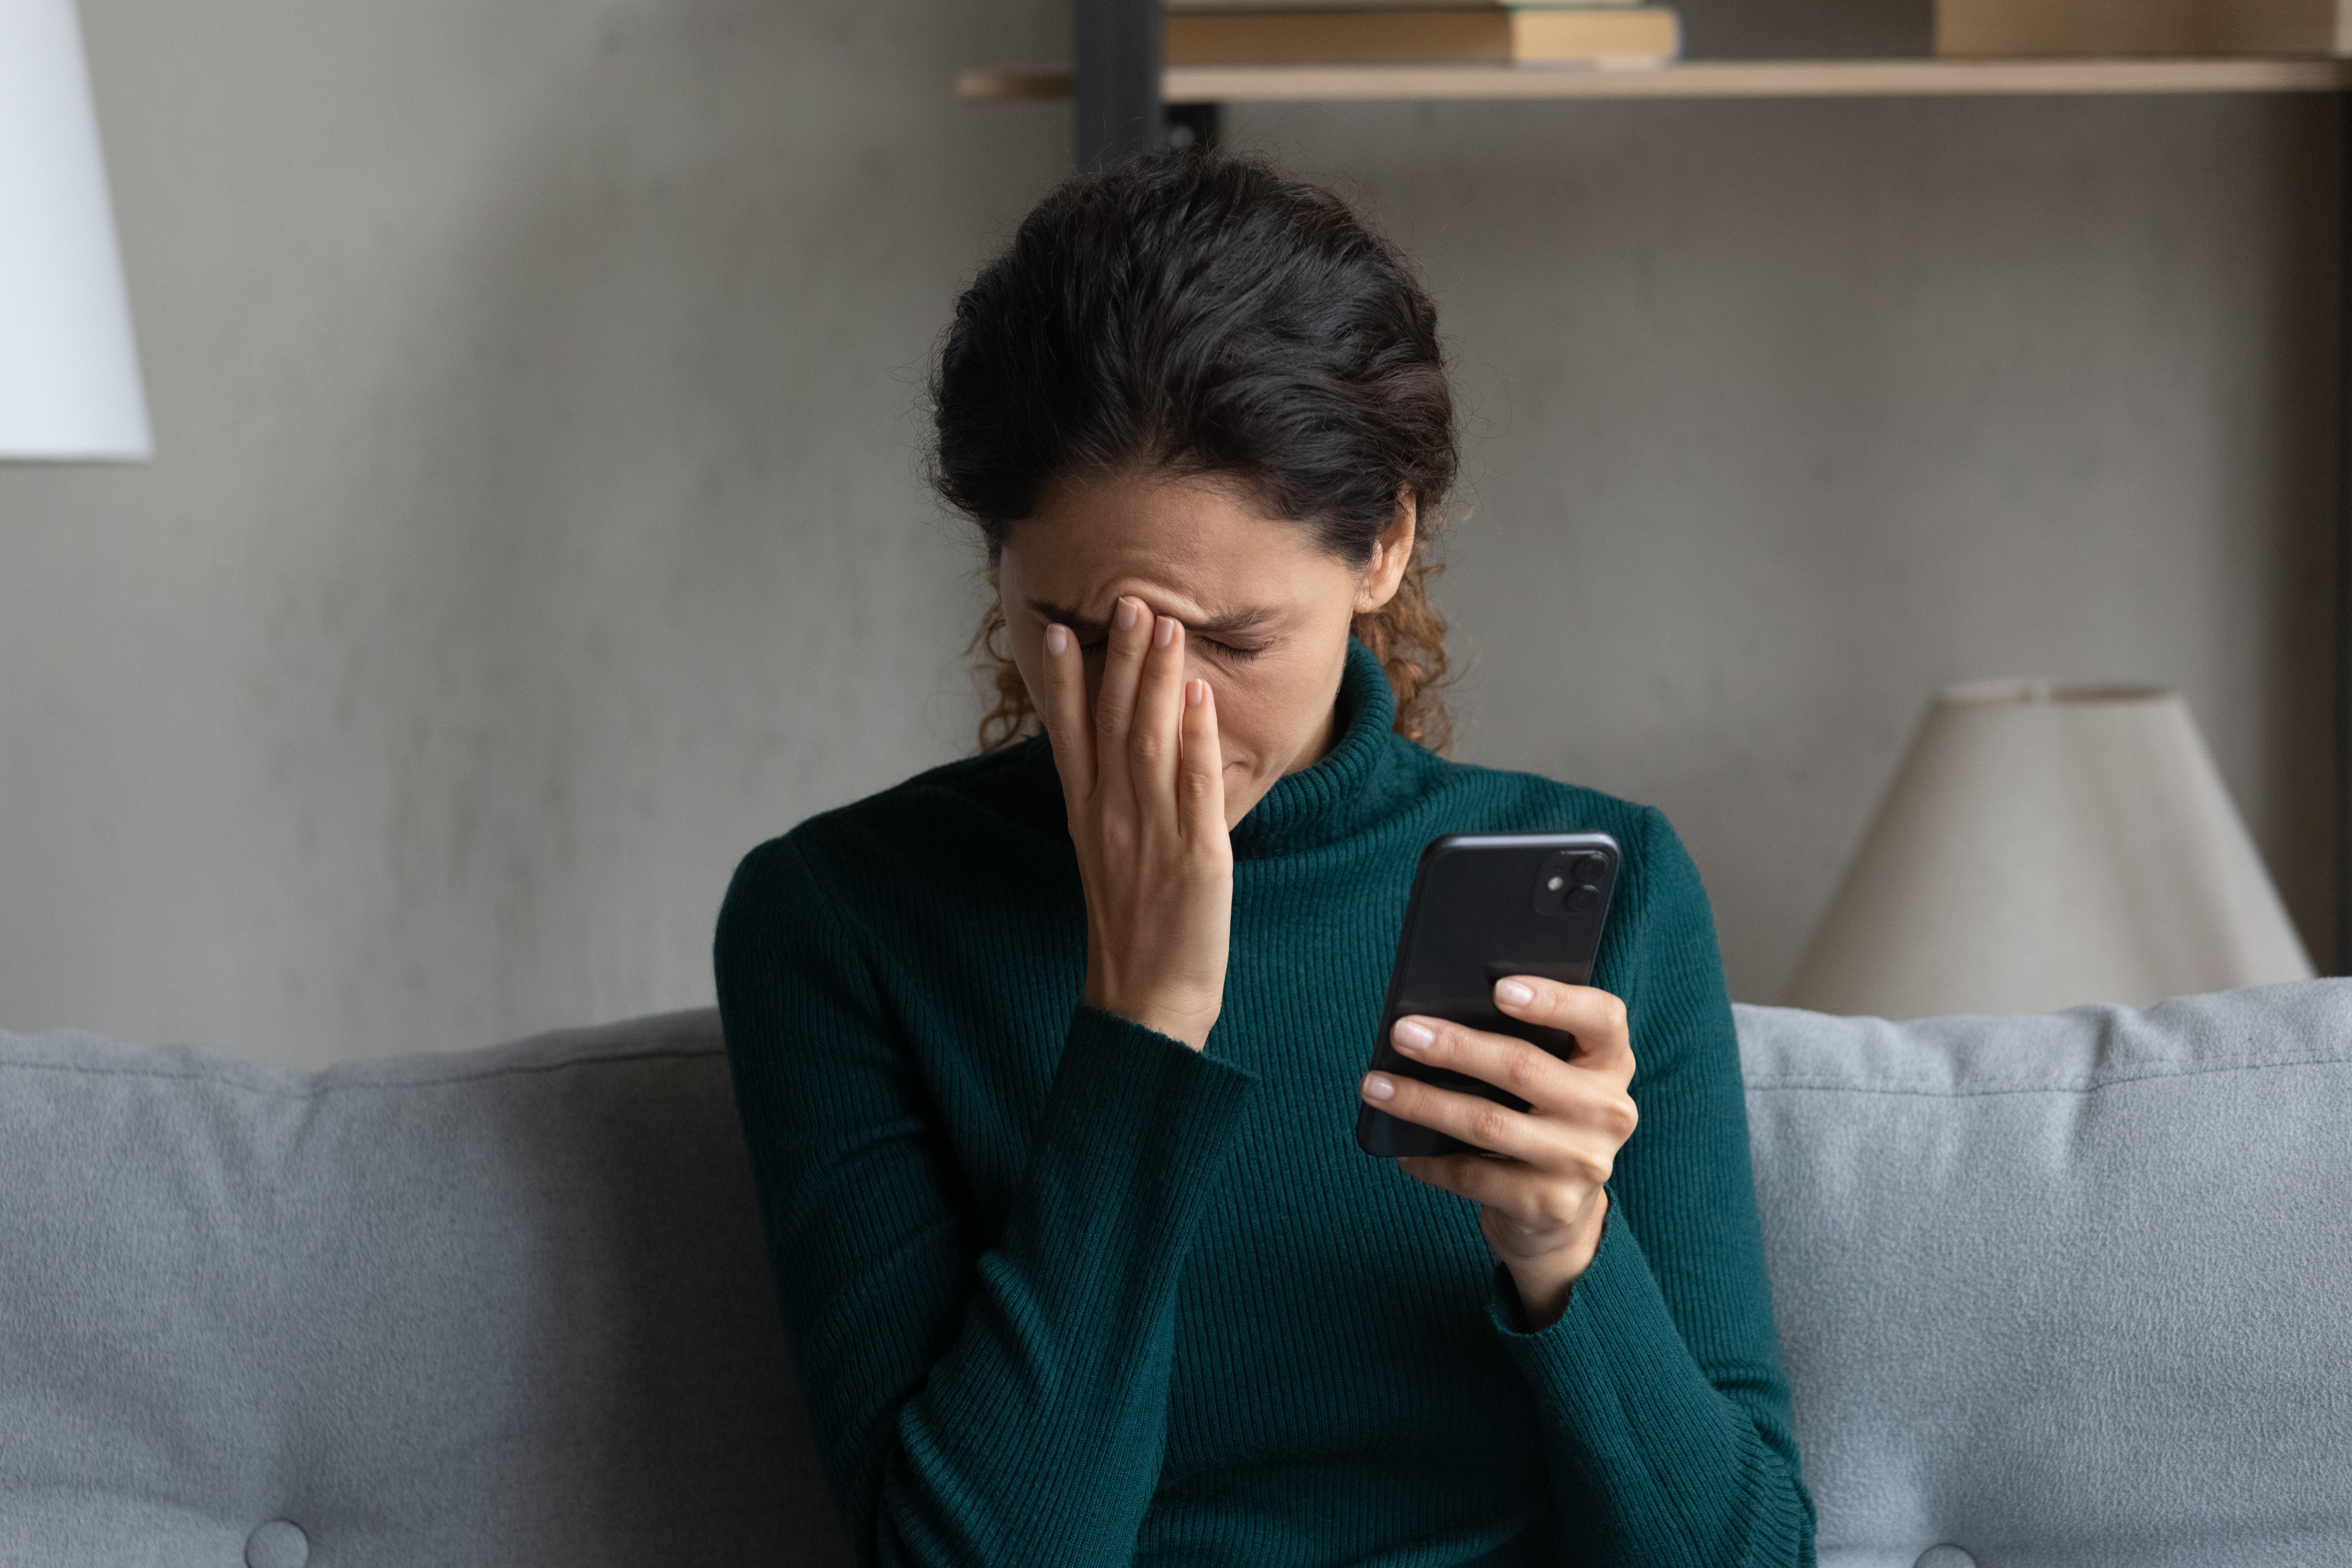 A woman looking upset as she holds her phone | Source: Shutterstock